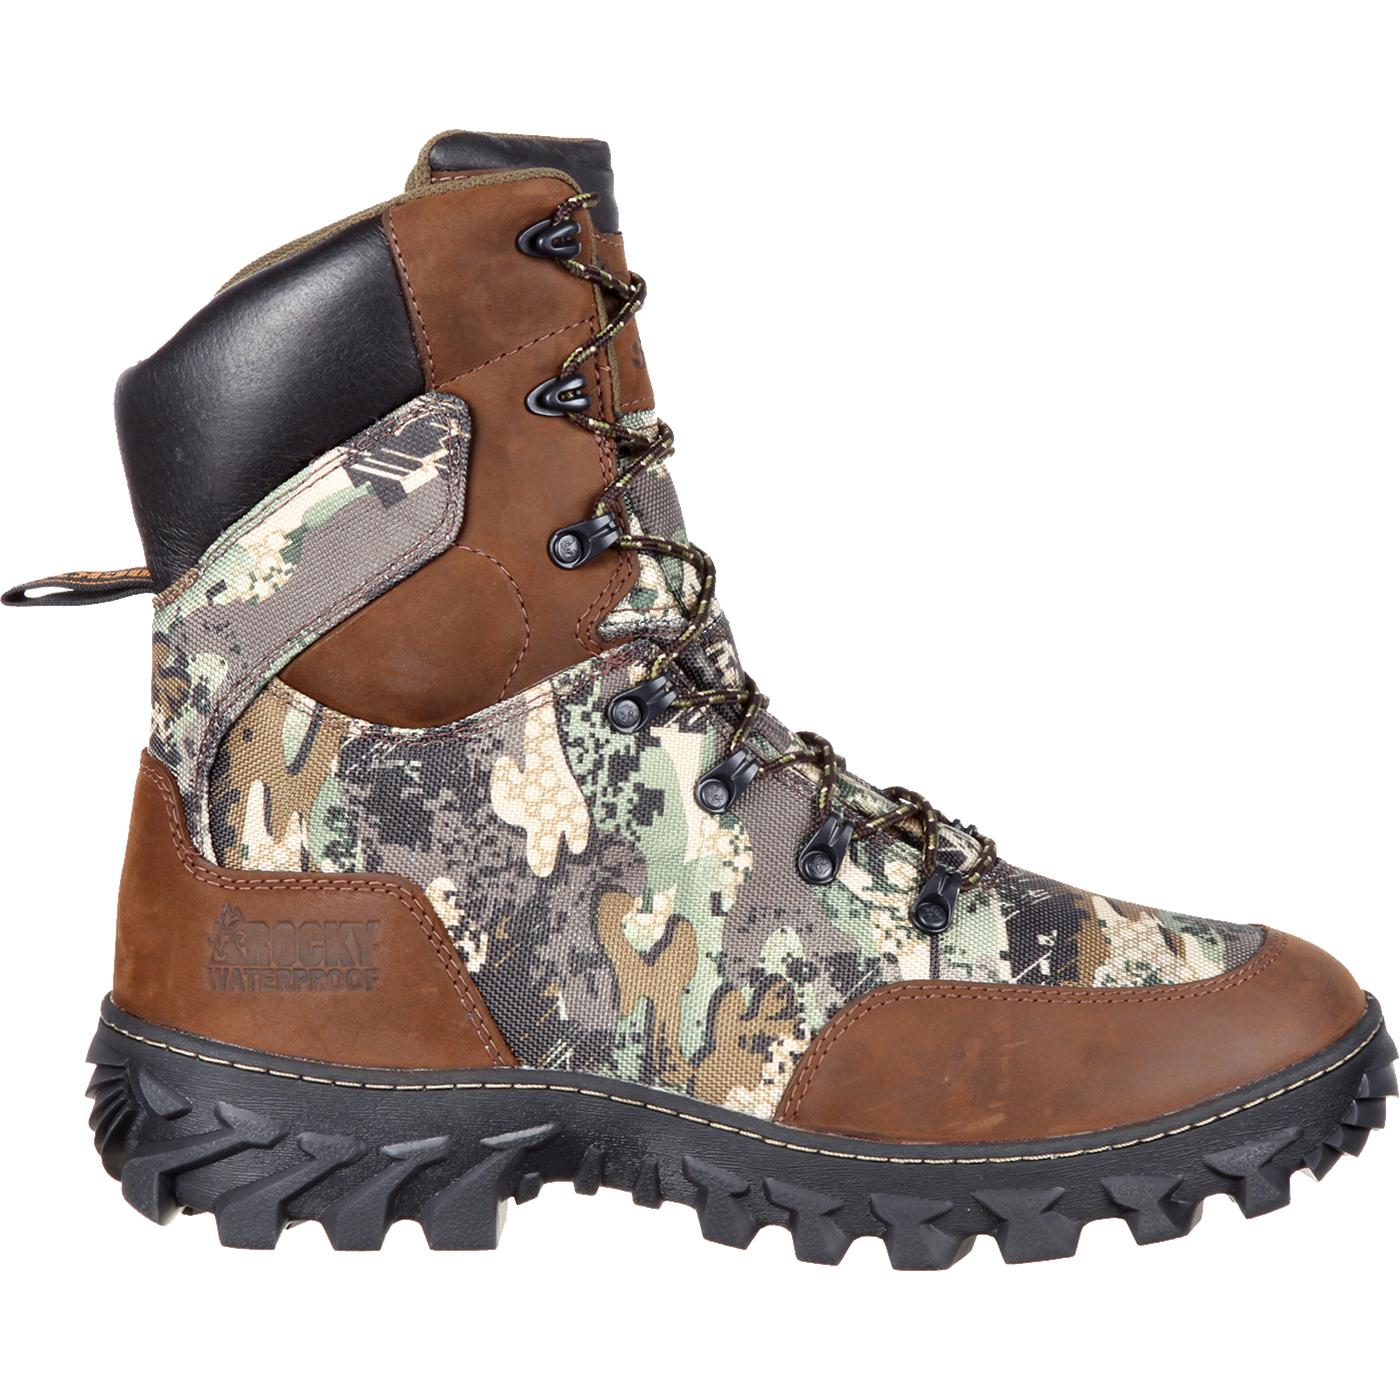 Rocky S2V Jungle Hunter: 200G Insulated Waterproof Outdoor Boots